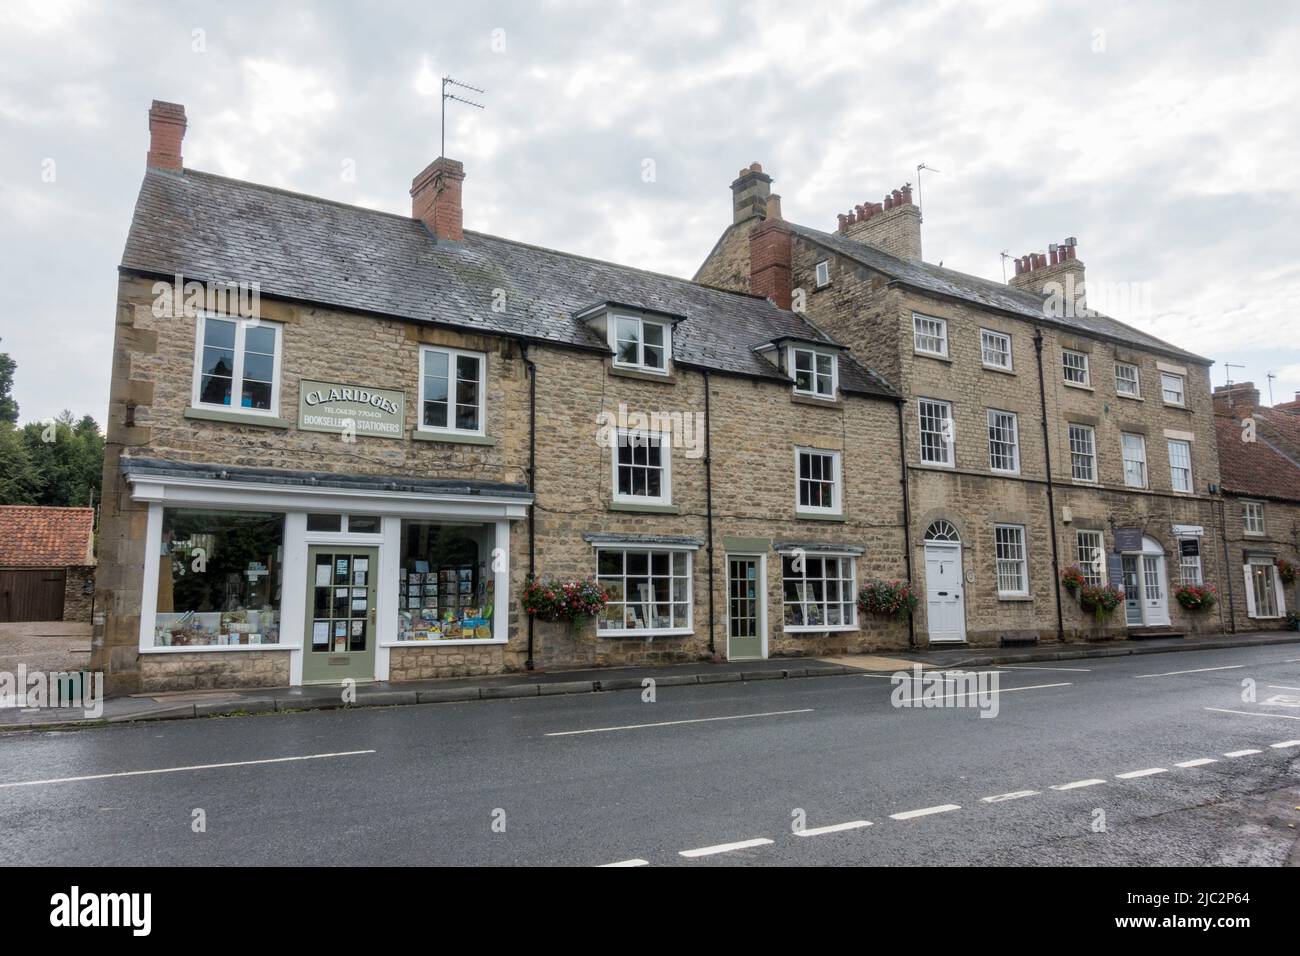 Claridges stationers in Helmsley, a market town in Ryedale, North Yorkshire, England. Stock Photo